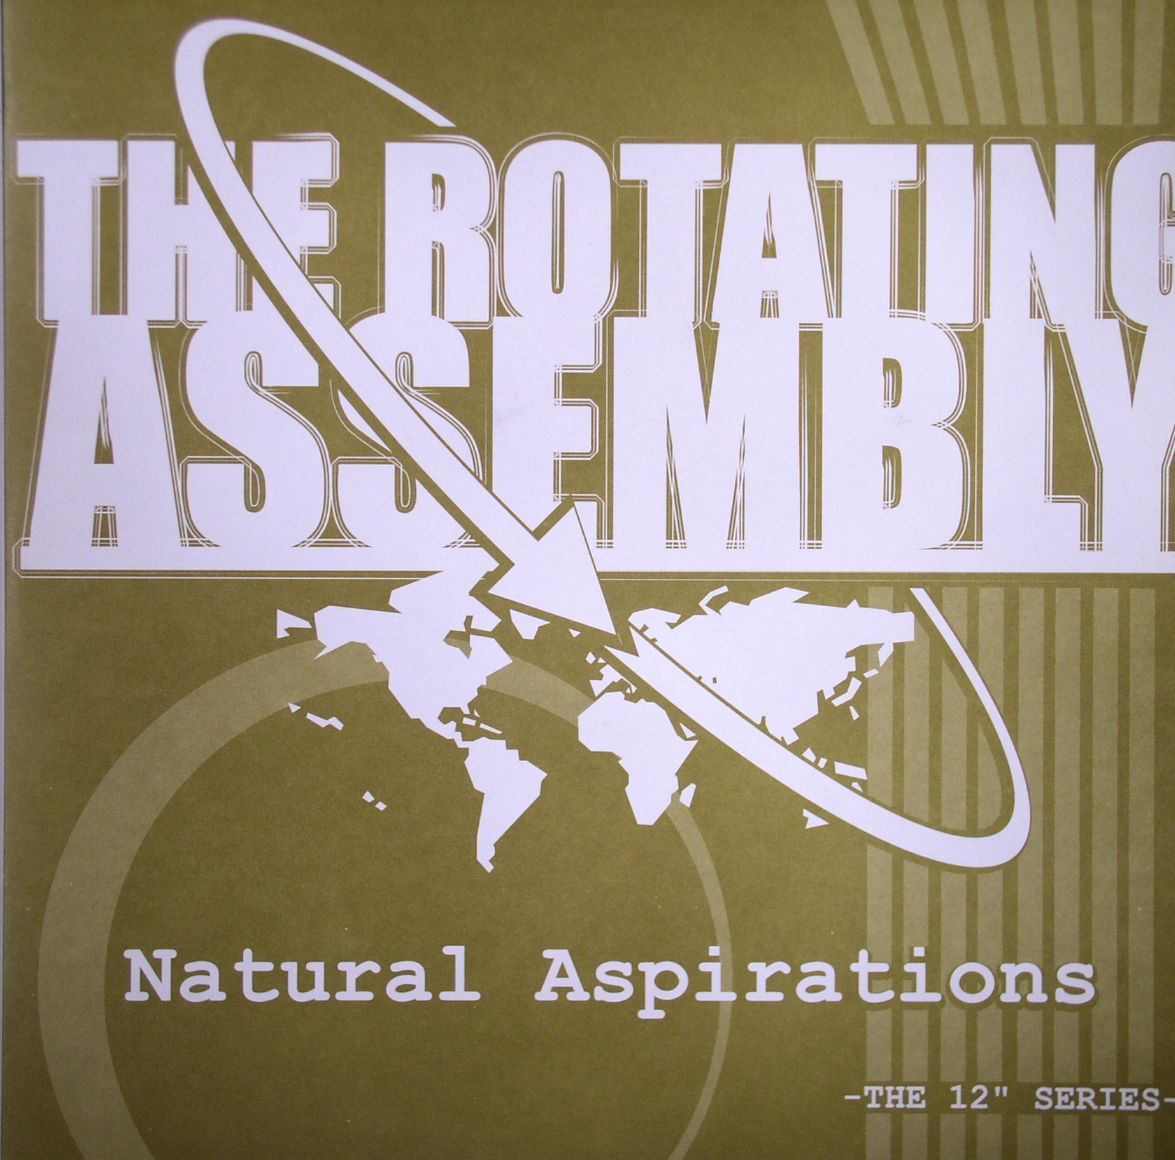 The Rotating Assembly | Theo Parrish | The Rotating Assembly | Theo Parrish | The Rotating Assembly | Theo Parrish Natural Aspirations